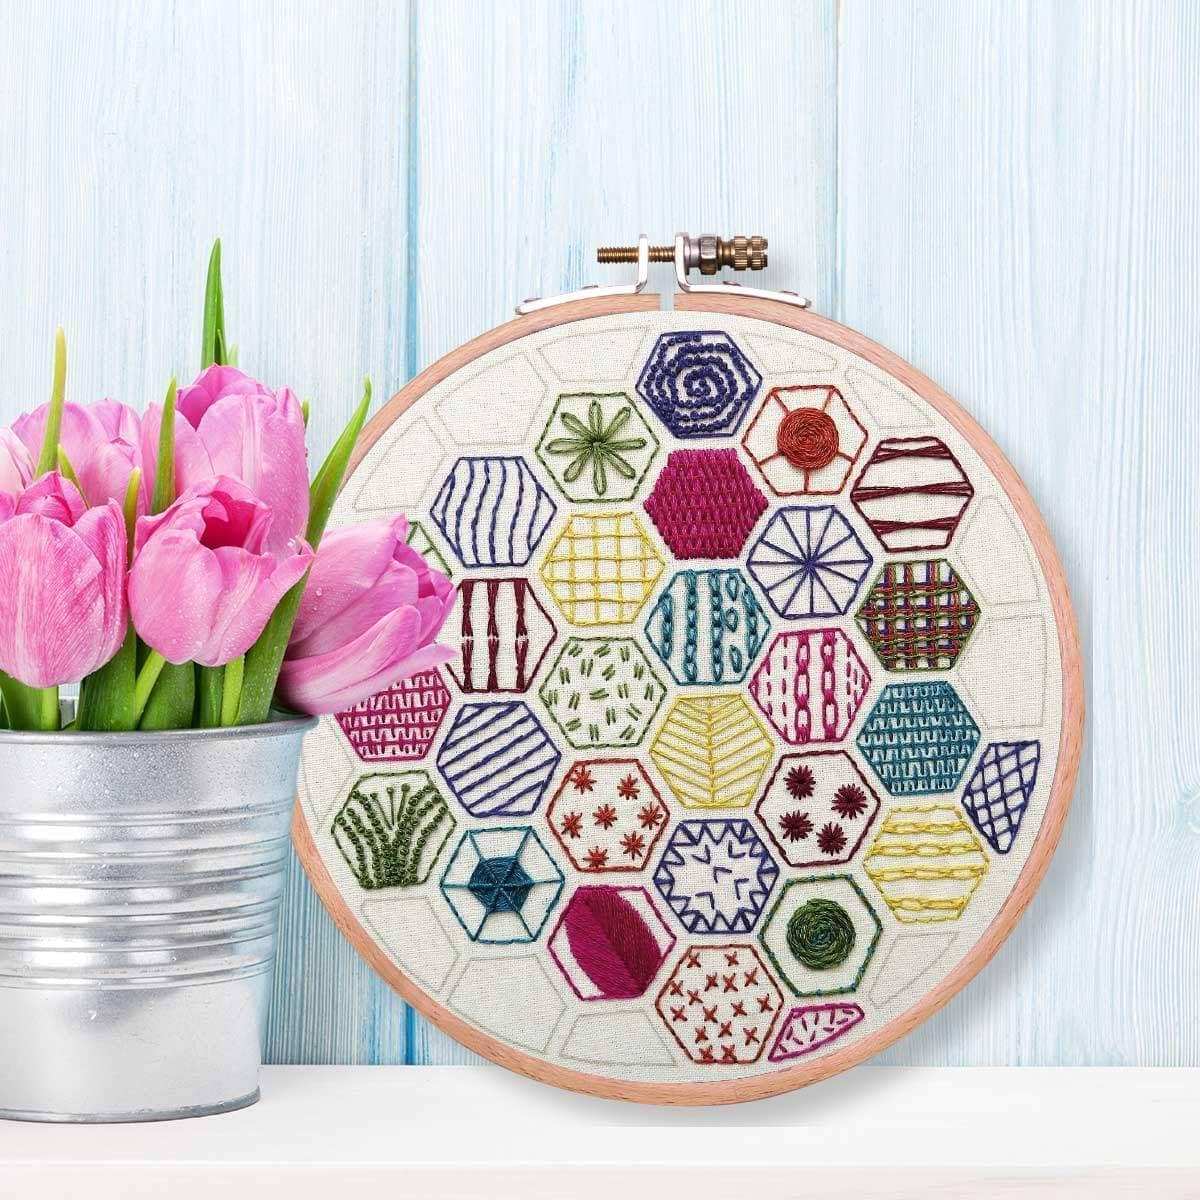 Hexagon Sampler to learn 20 hand embroidery Stitches , PDF Download , StitchDoodles , embroidery hoop kit, embroidery kits for beginners, hand embroidery, PDF pattern, unique embroidery kits , StitchDoodles , shop.stitchdoodles.com